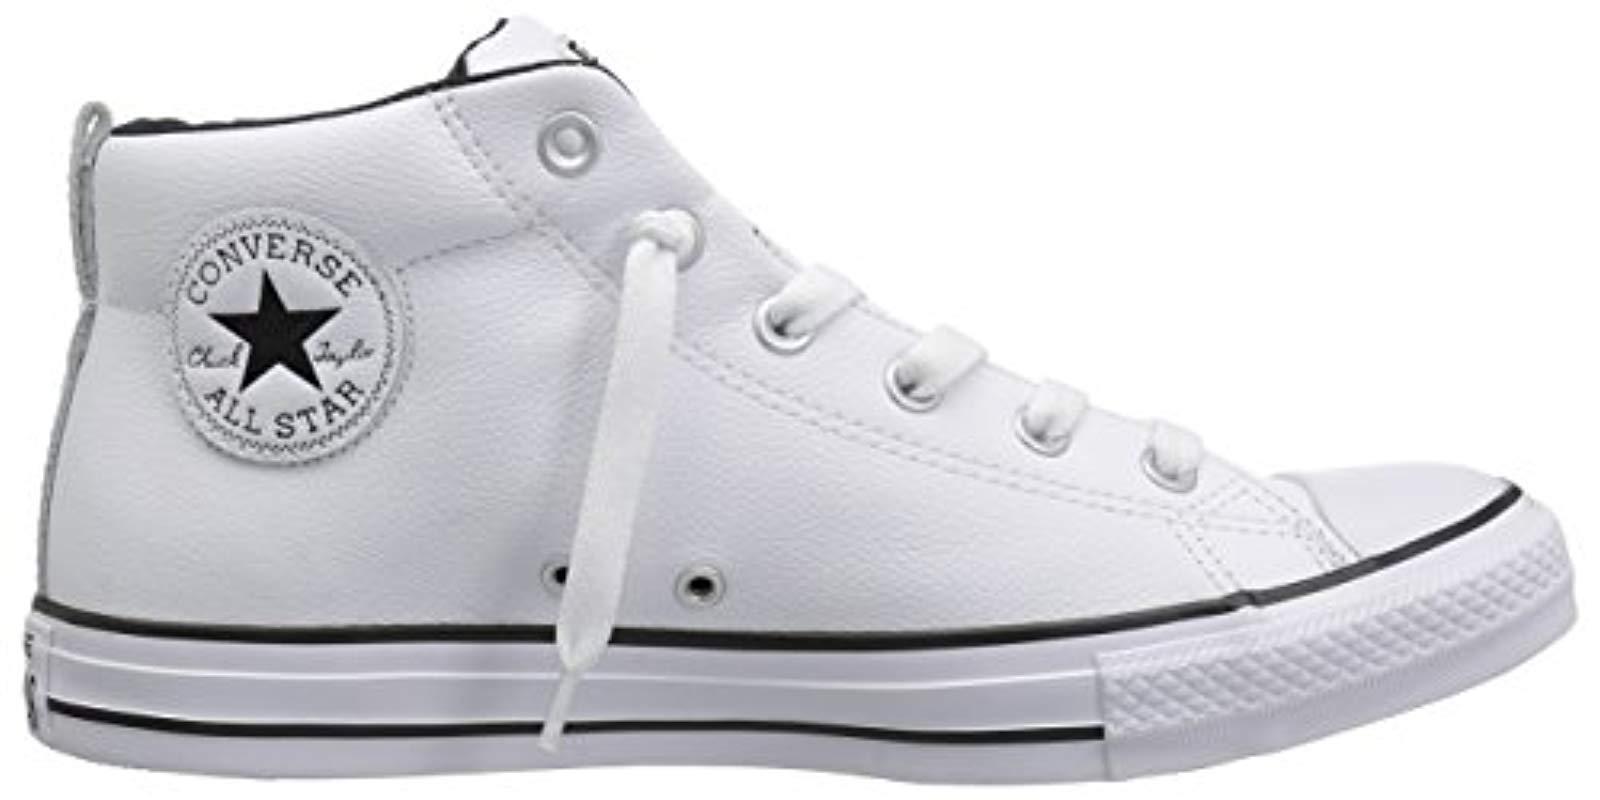 Converse Street Leather Mid Top Sneaker in White/Black (White) for Men ...